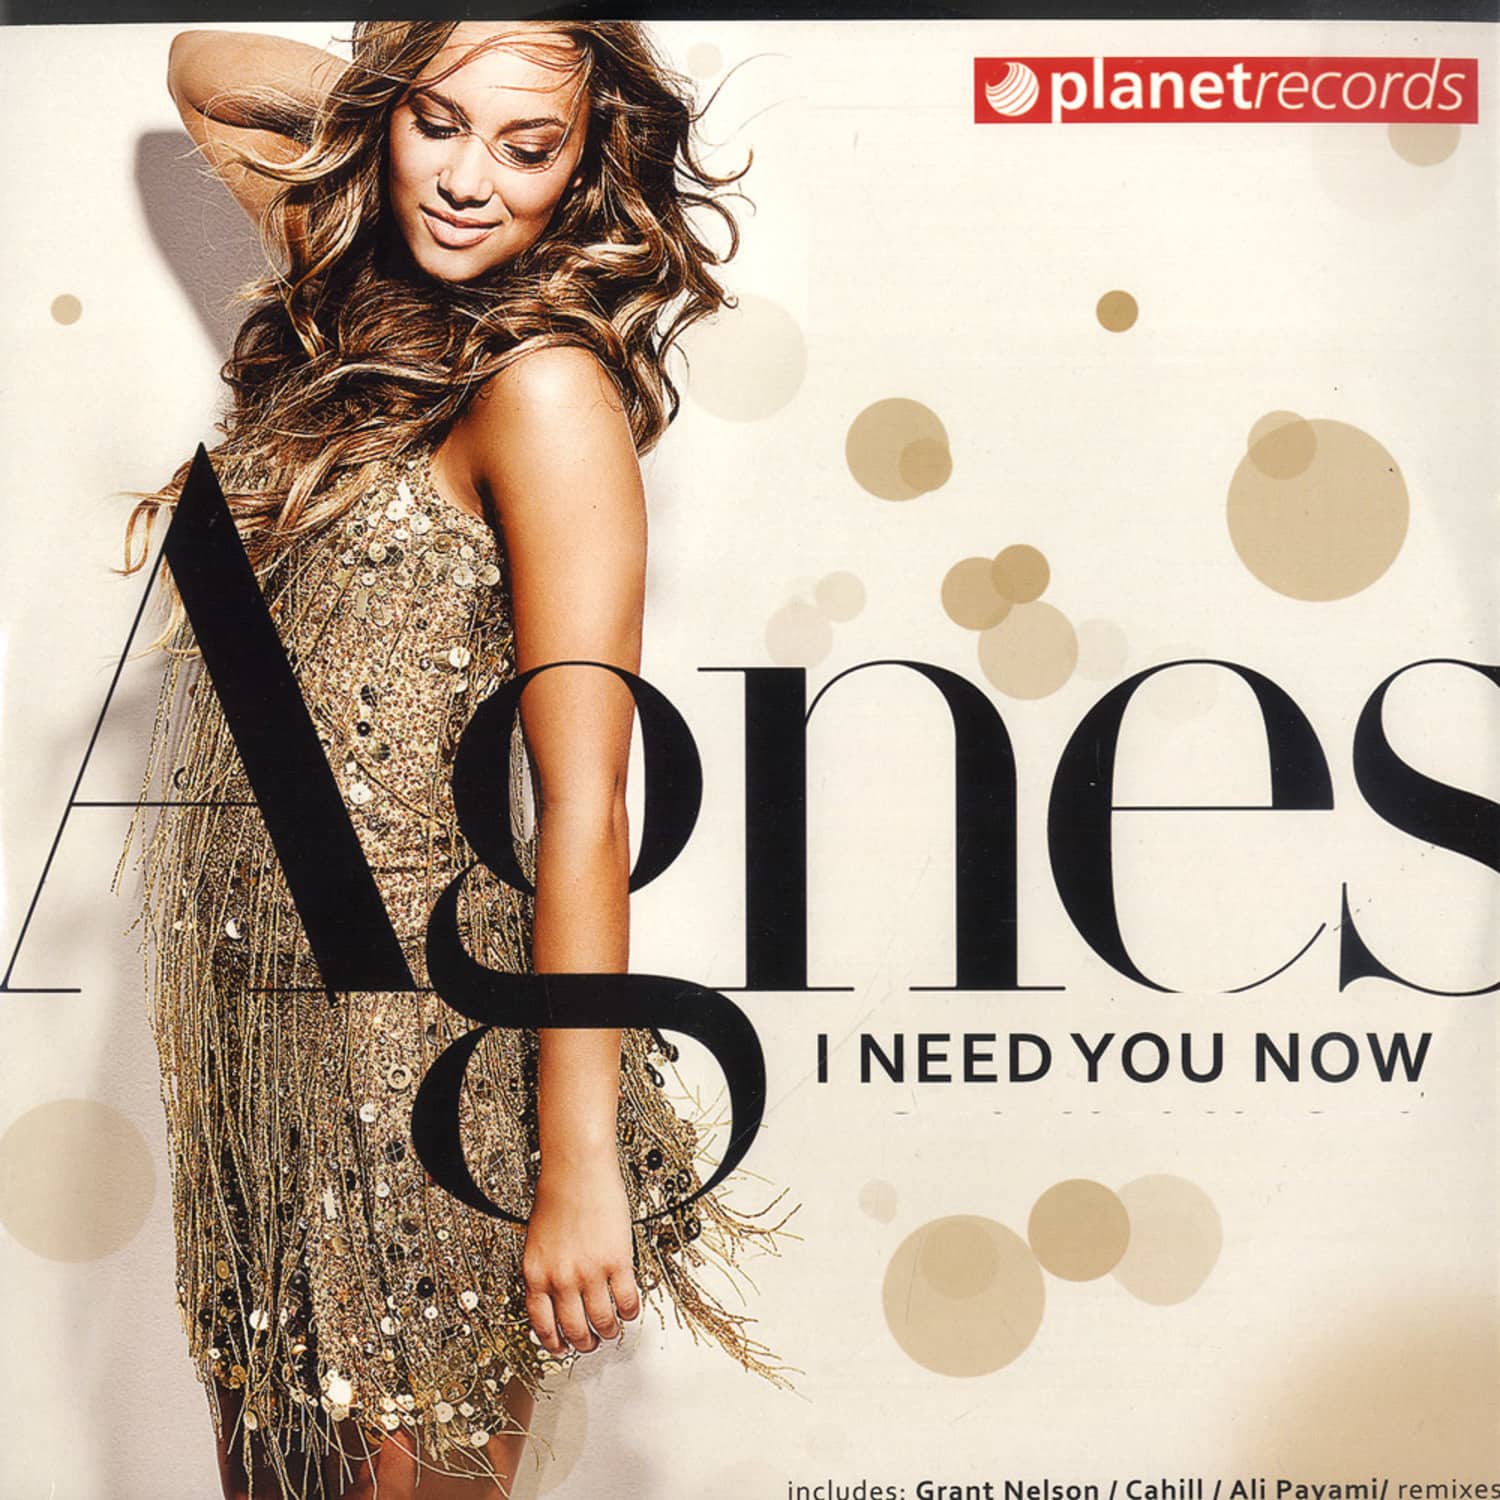 Agnes - I NEED YOU NOW / ON AND ON